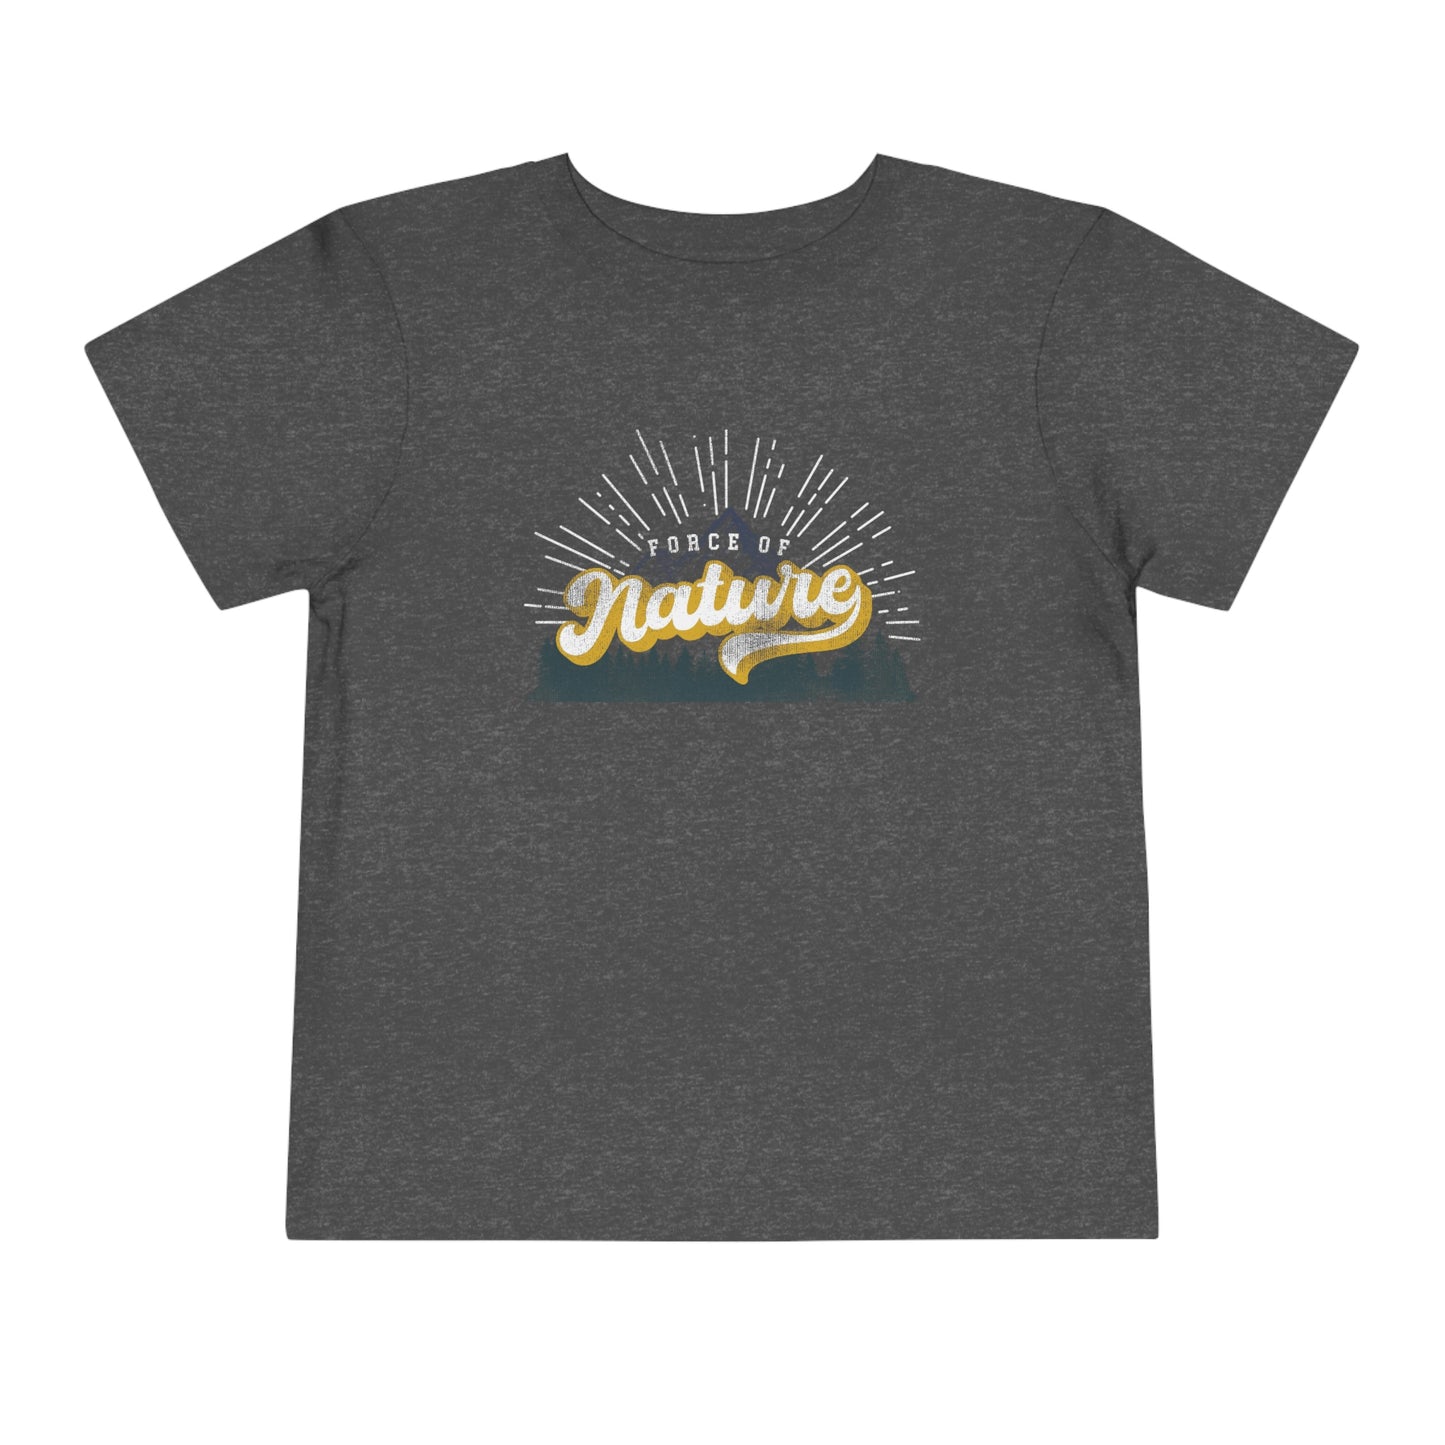 Force of Nature Retro Toddler Tee